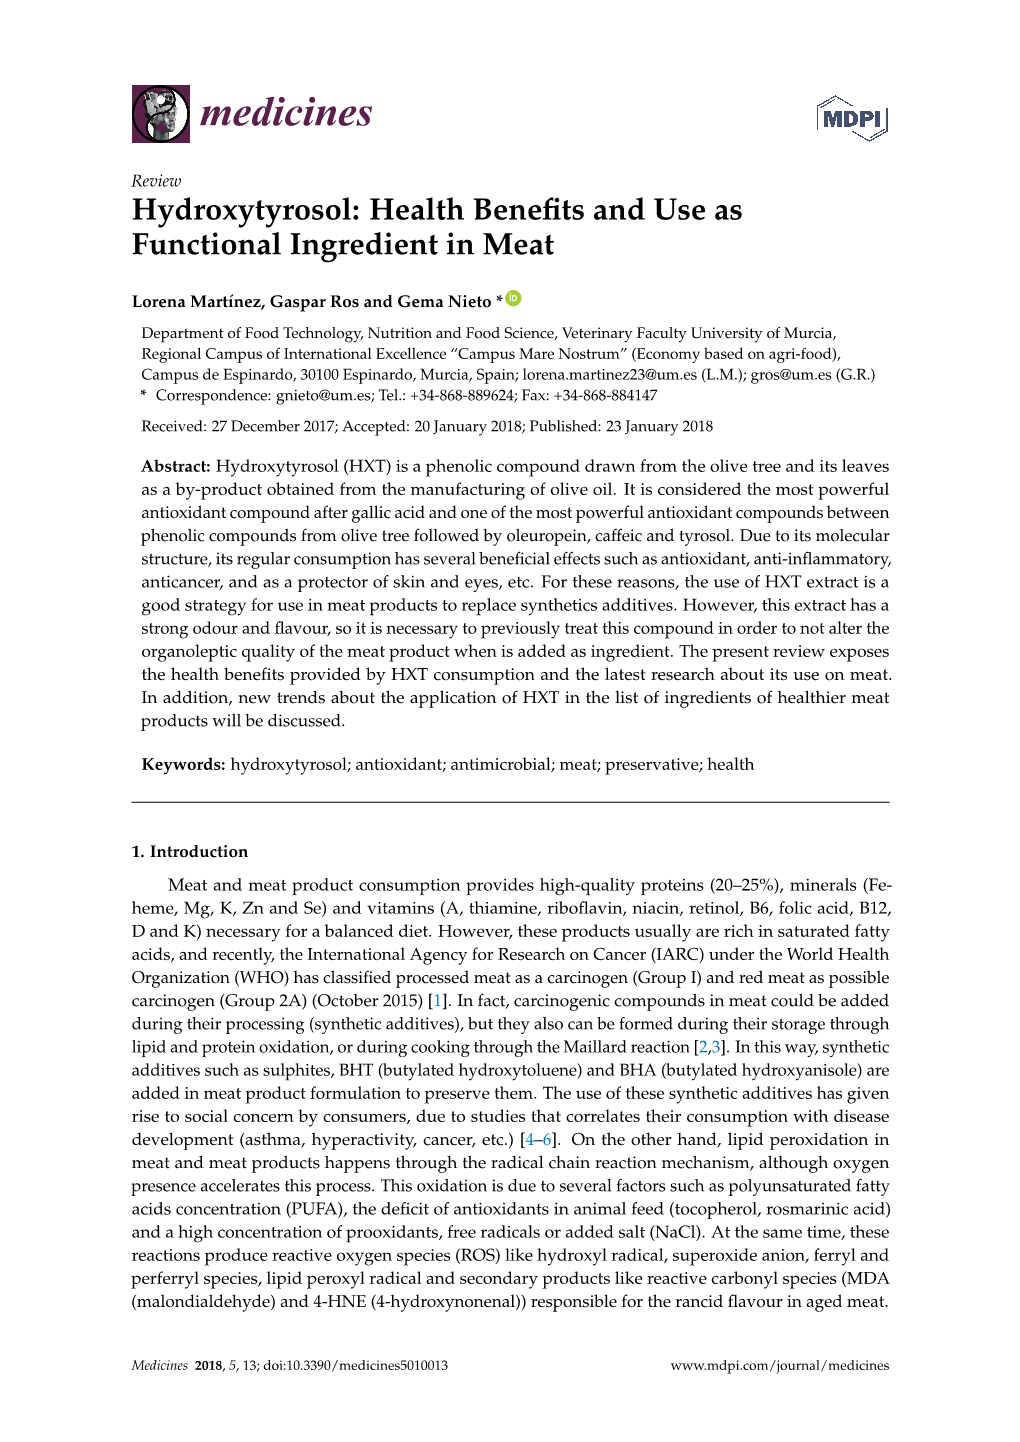 Hydroxytyrosol: Health Beneﬁts and Use As Functional Ingredient in Meat